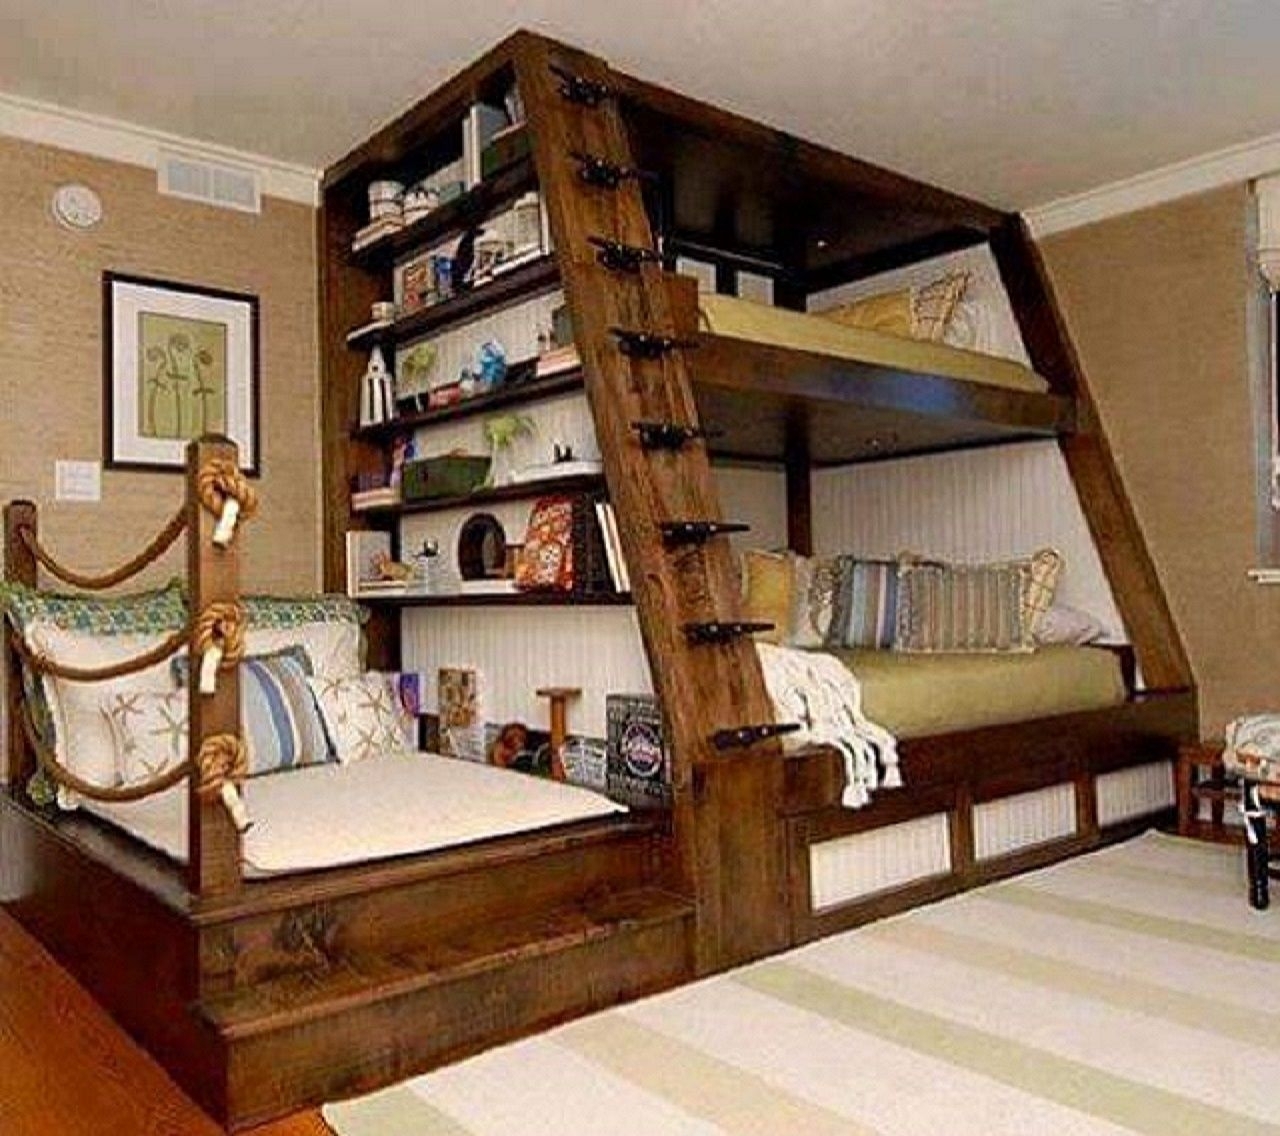 bunk beds with shelves